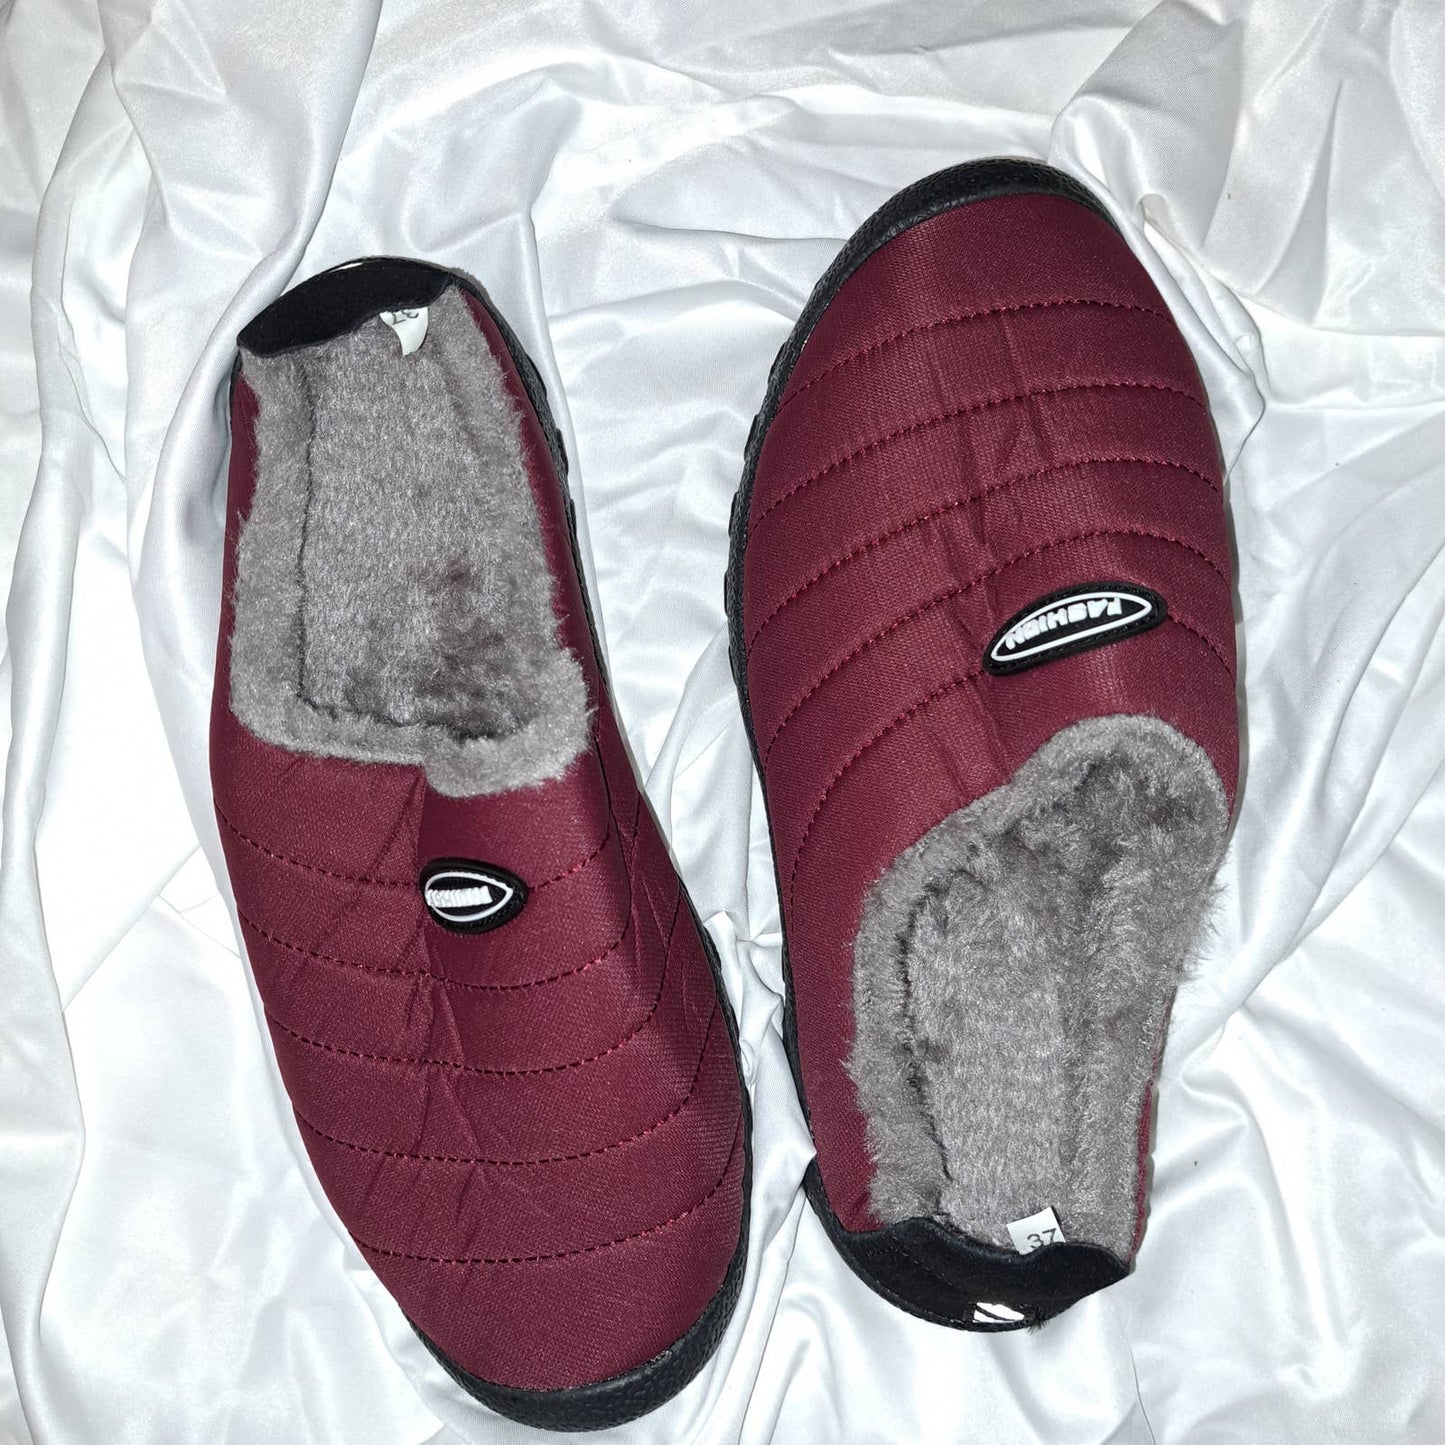 NEW - Most COMFY slippers! Fur Lined Indoor or Outdoor SZ 6.5-7